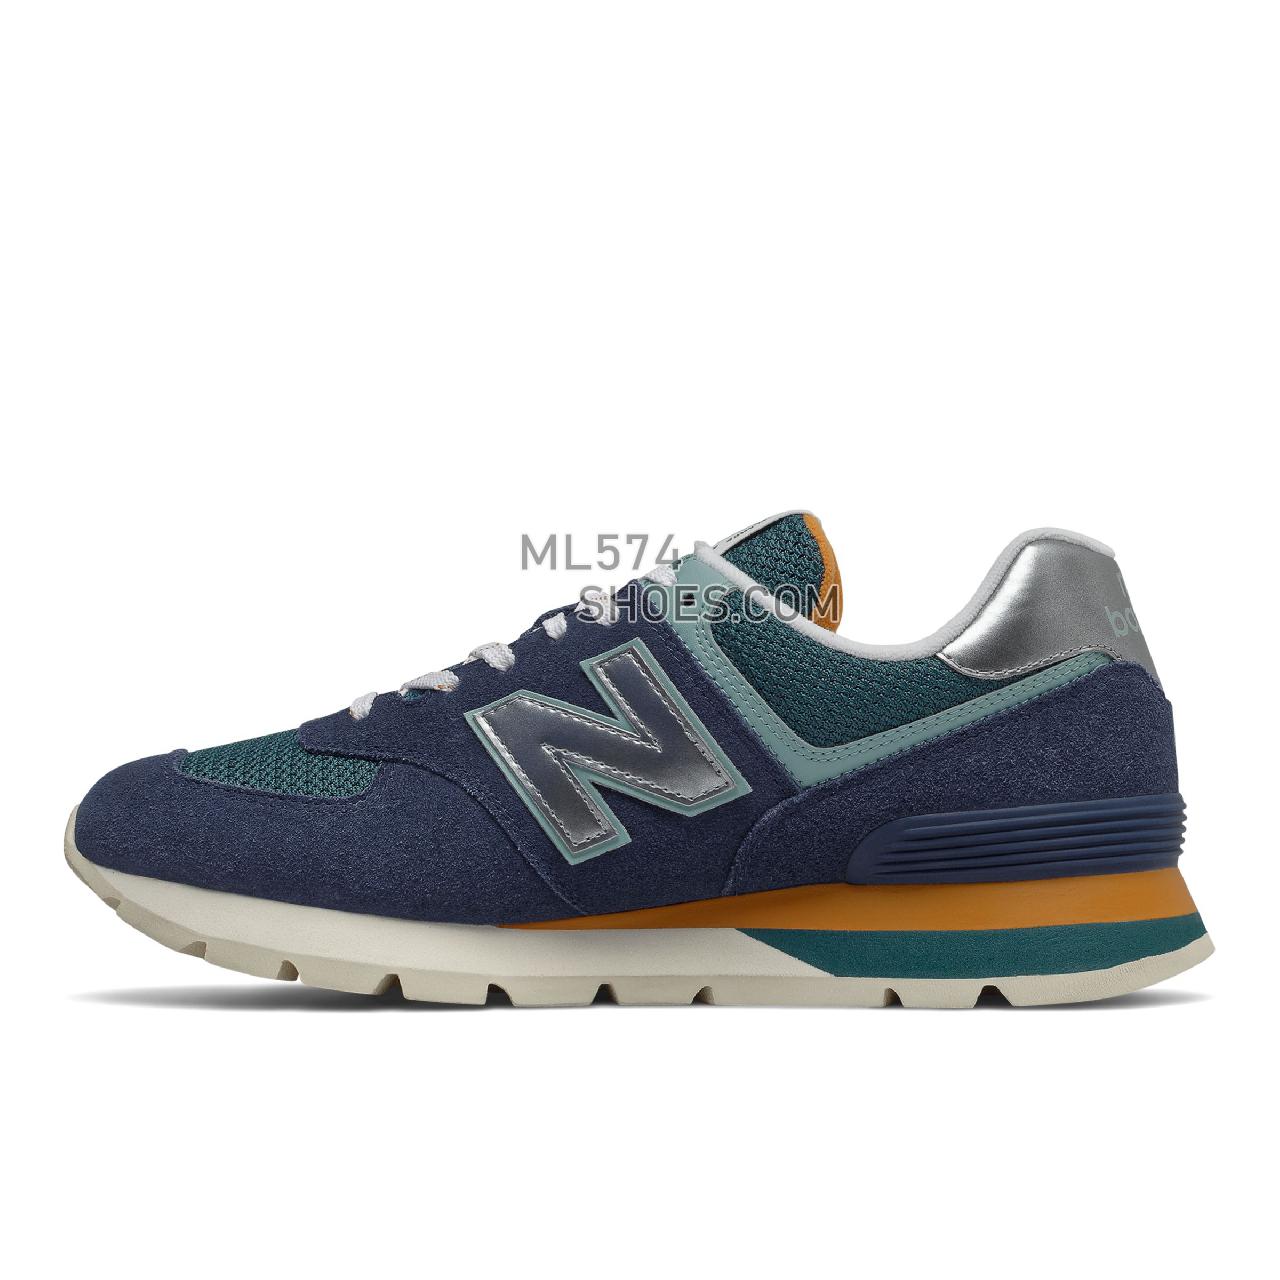 New Balance 574 Rugged - Men's Classic Sneakers - Natural Indigo with Mountain Teal - ML574DHL